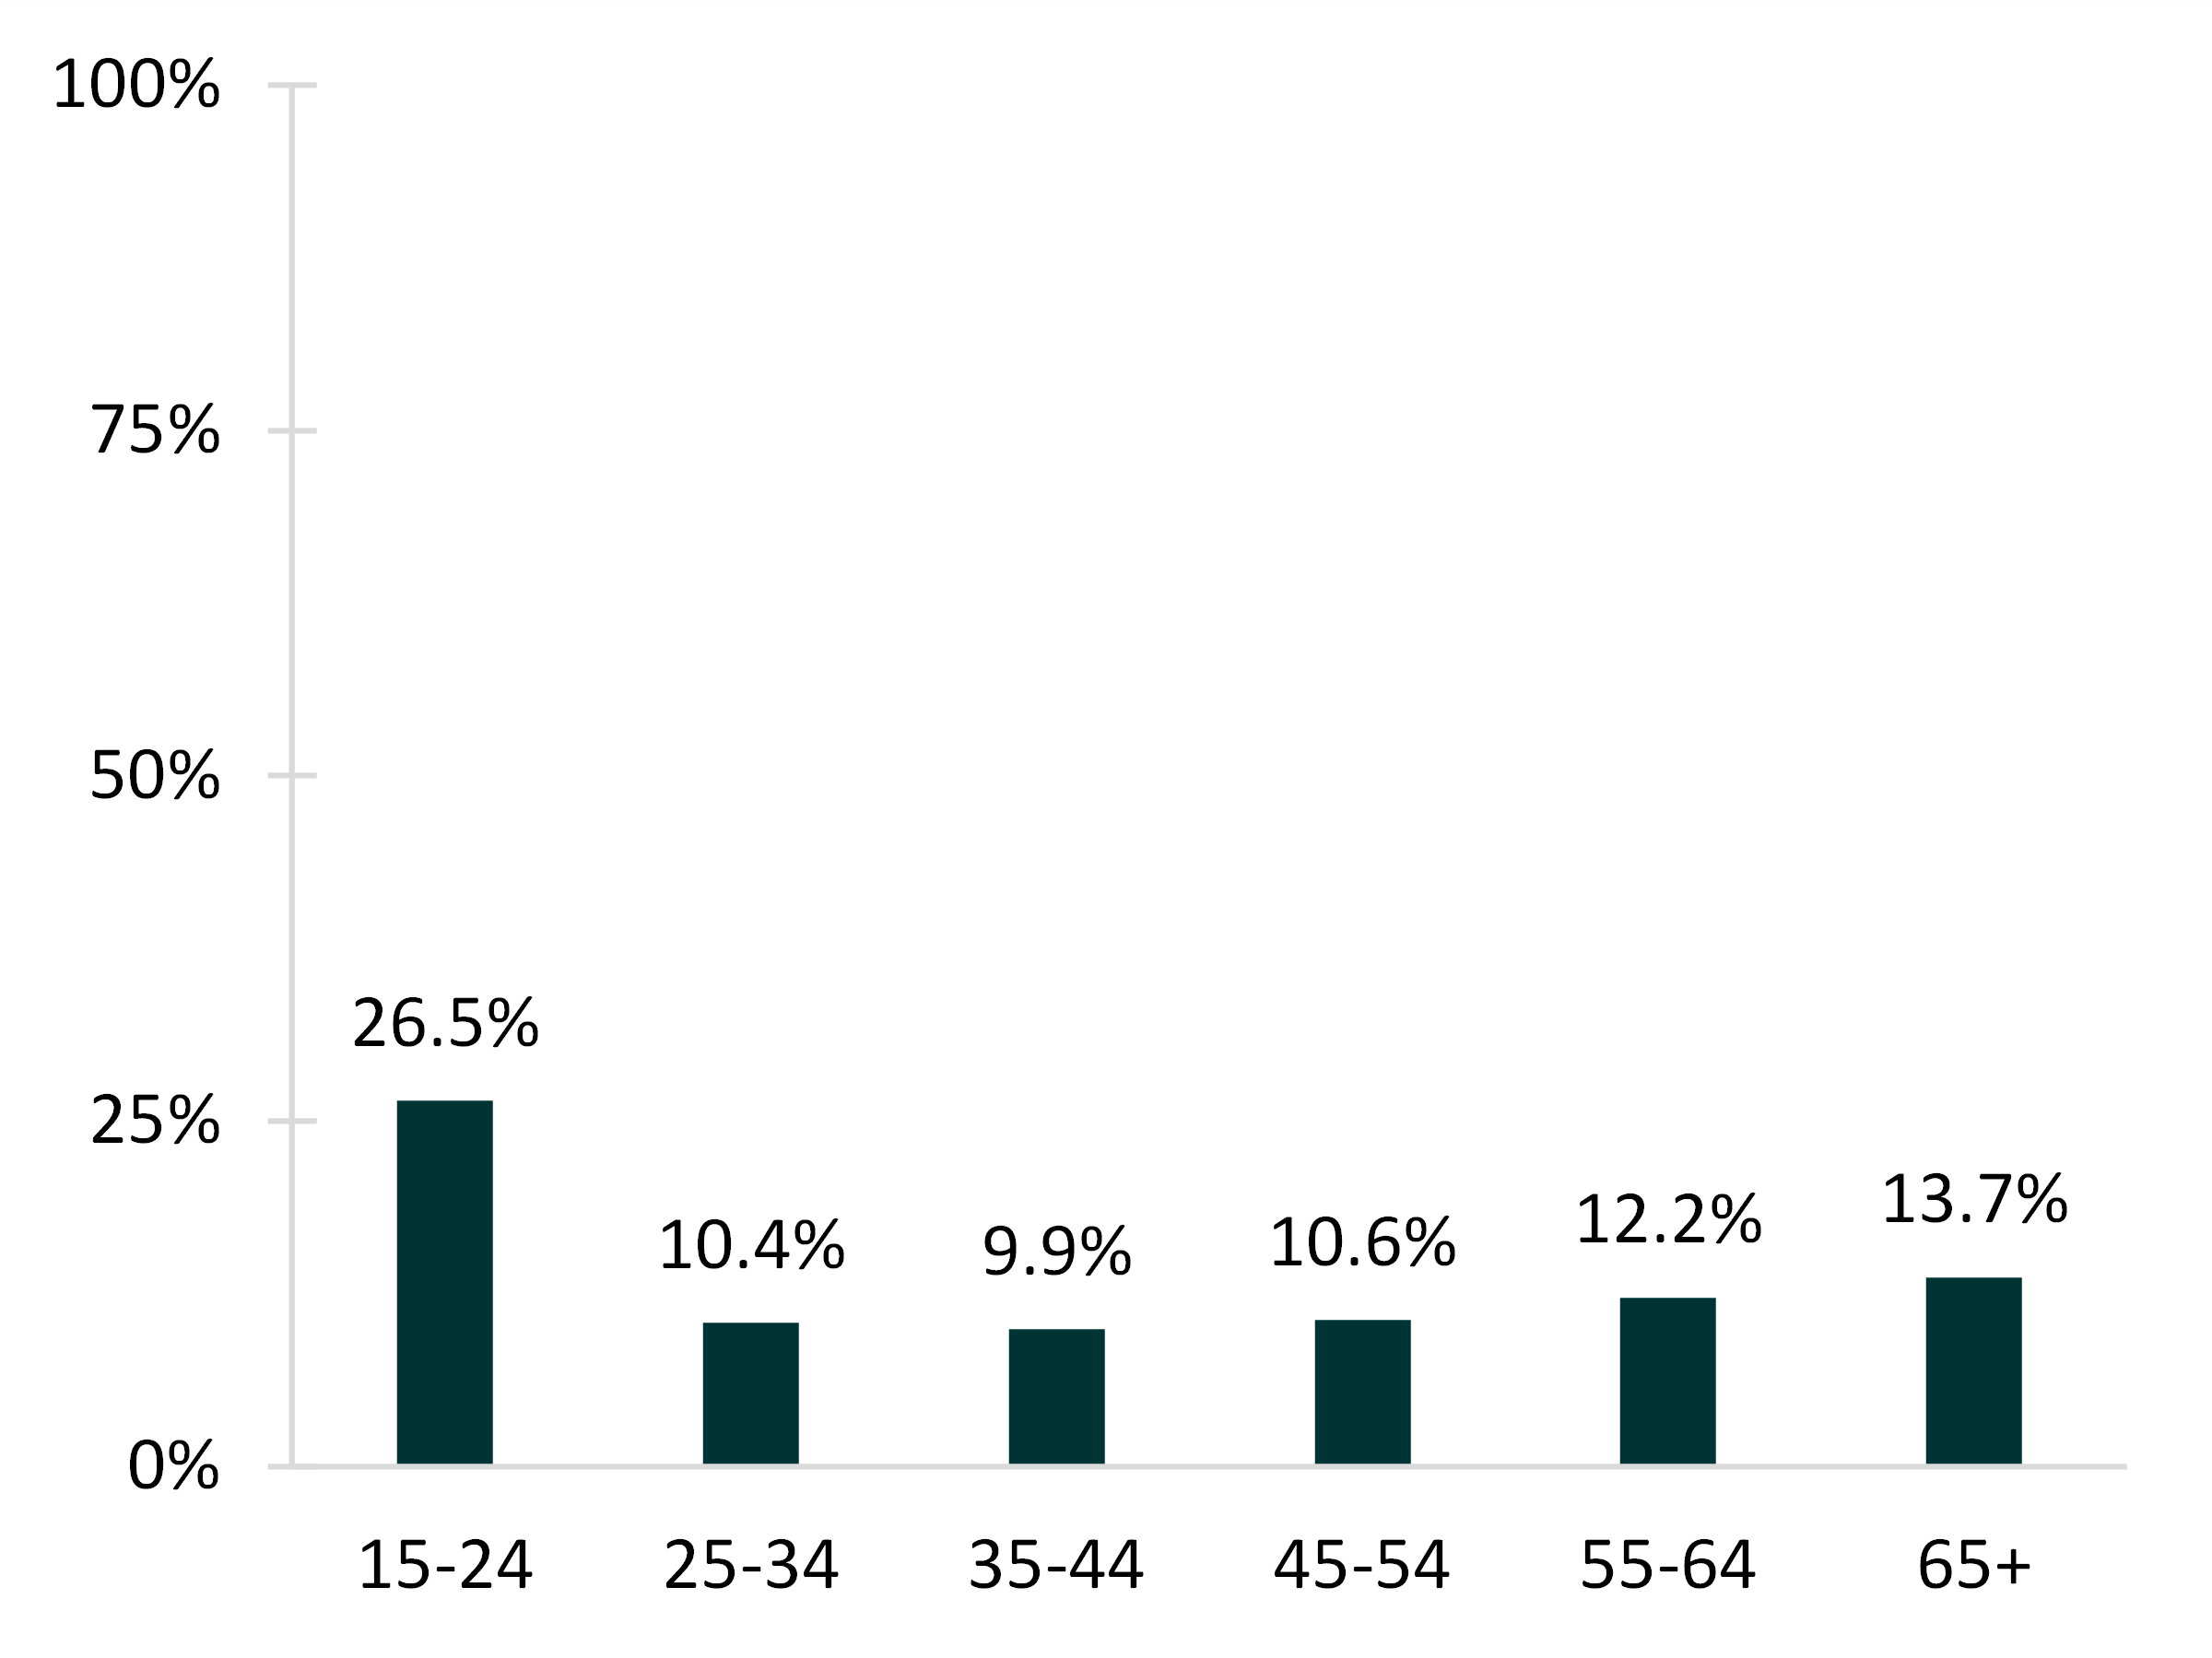 teal bar chart showing share of newlyweds in a LAT relationship by age group, 2018